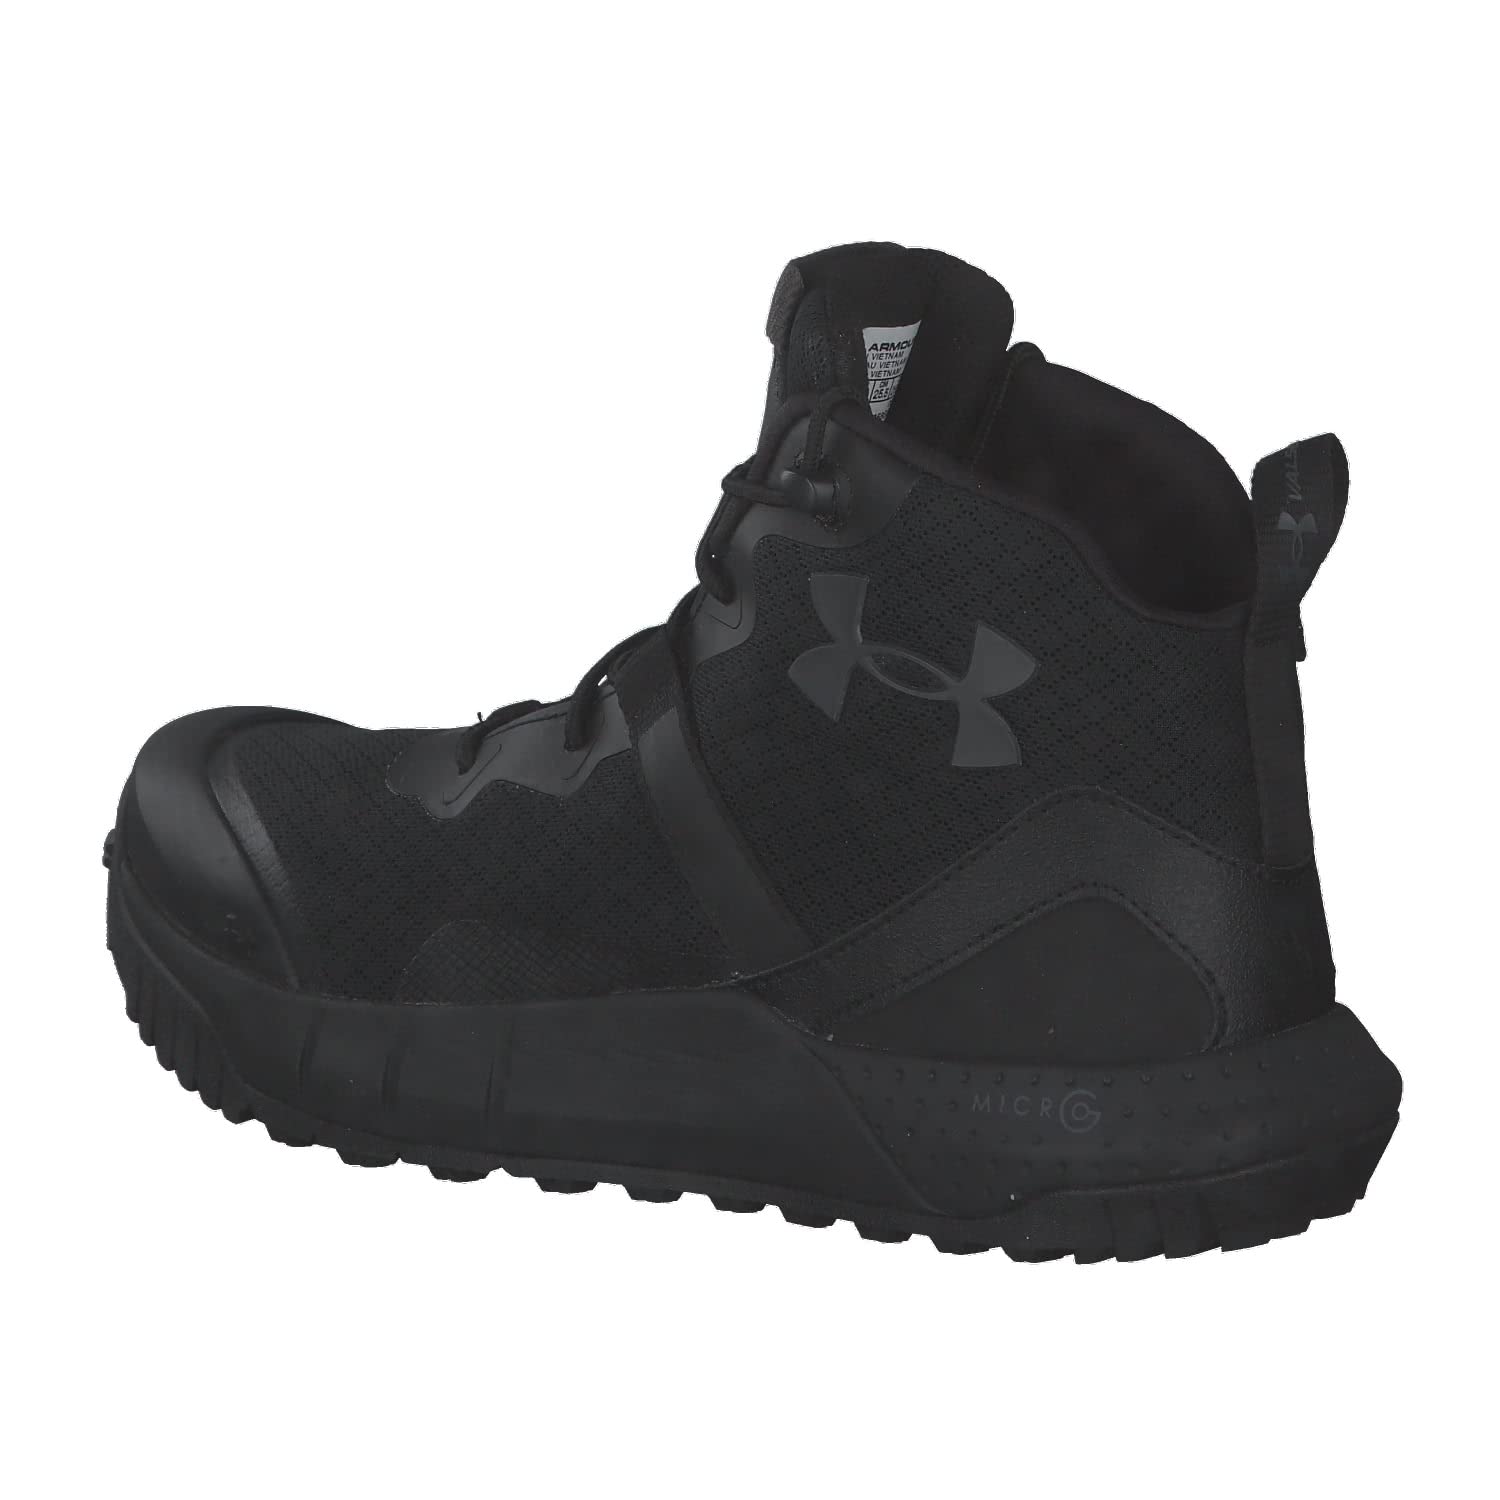 Under Armour Men's Micro G Valsetz Mid Military and Tactical Boot